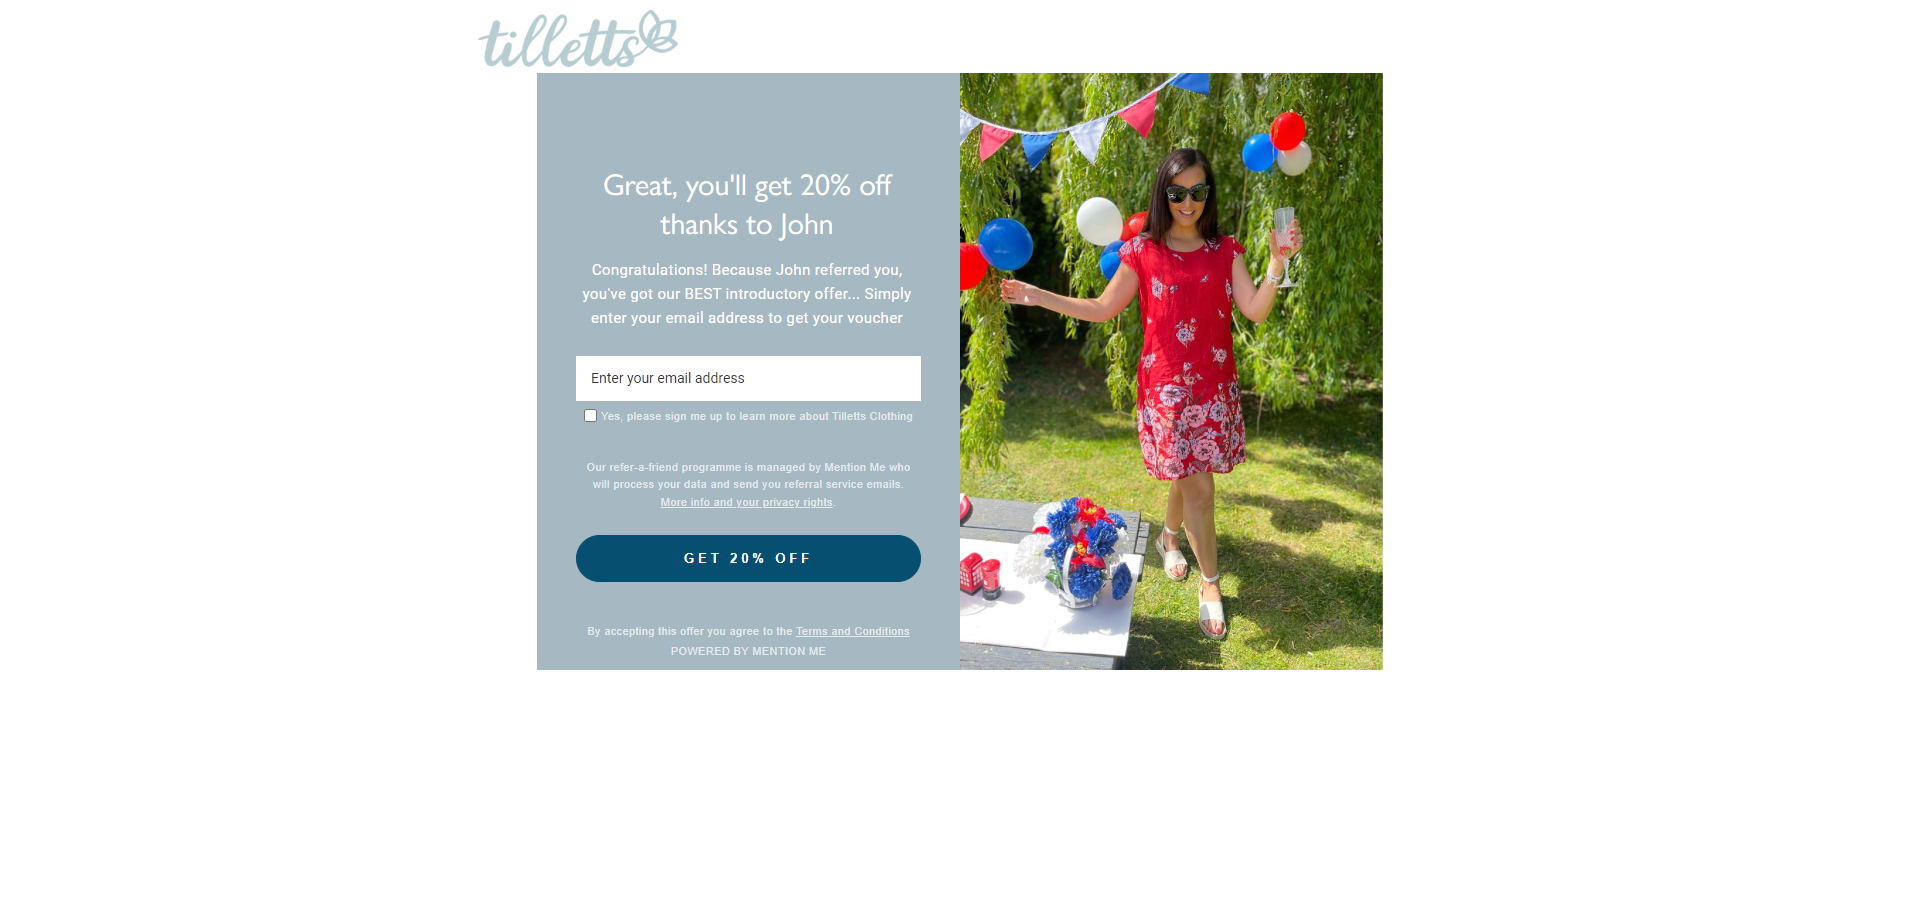 Referral Landing Page for Tilletts Clothing